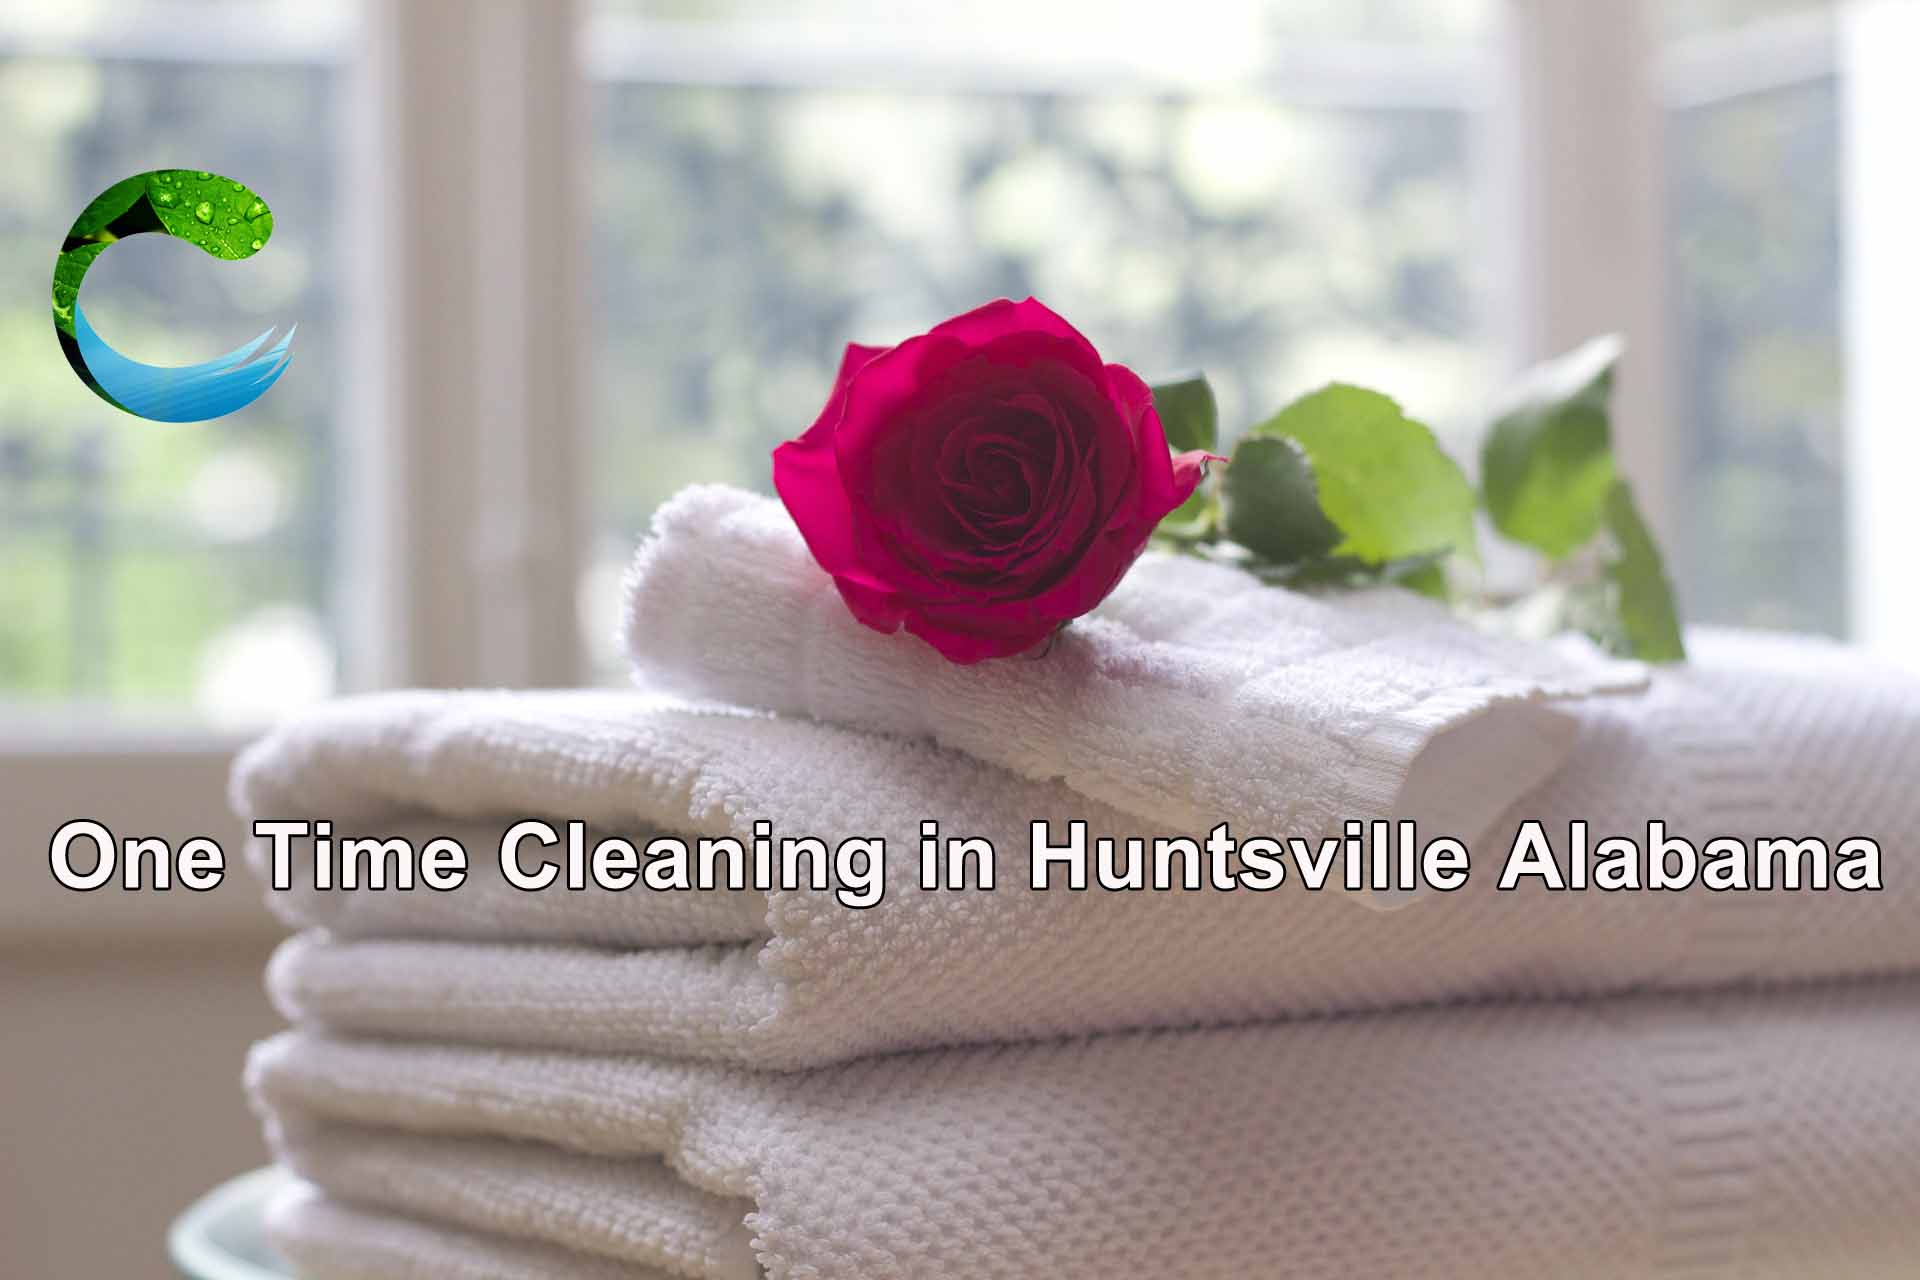 One Time Cleaning in Huntsville Alabama